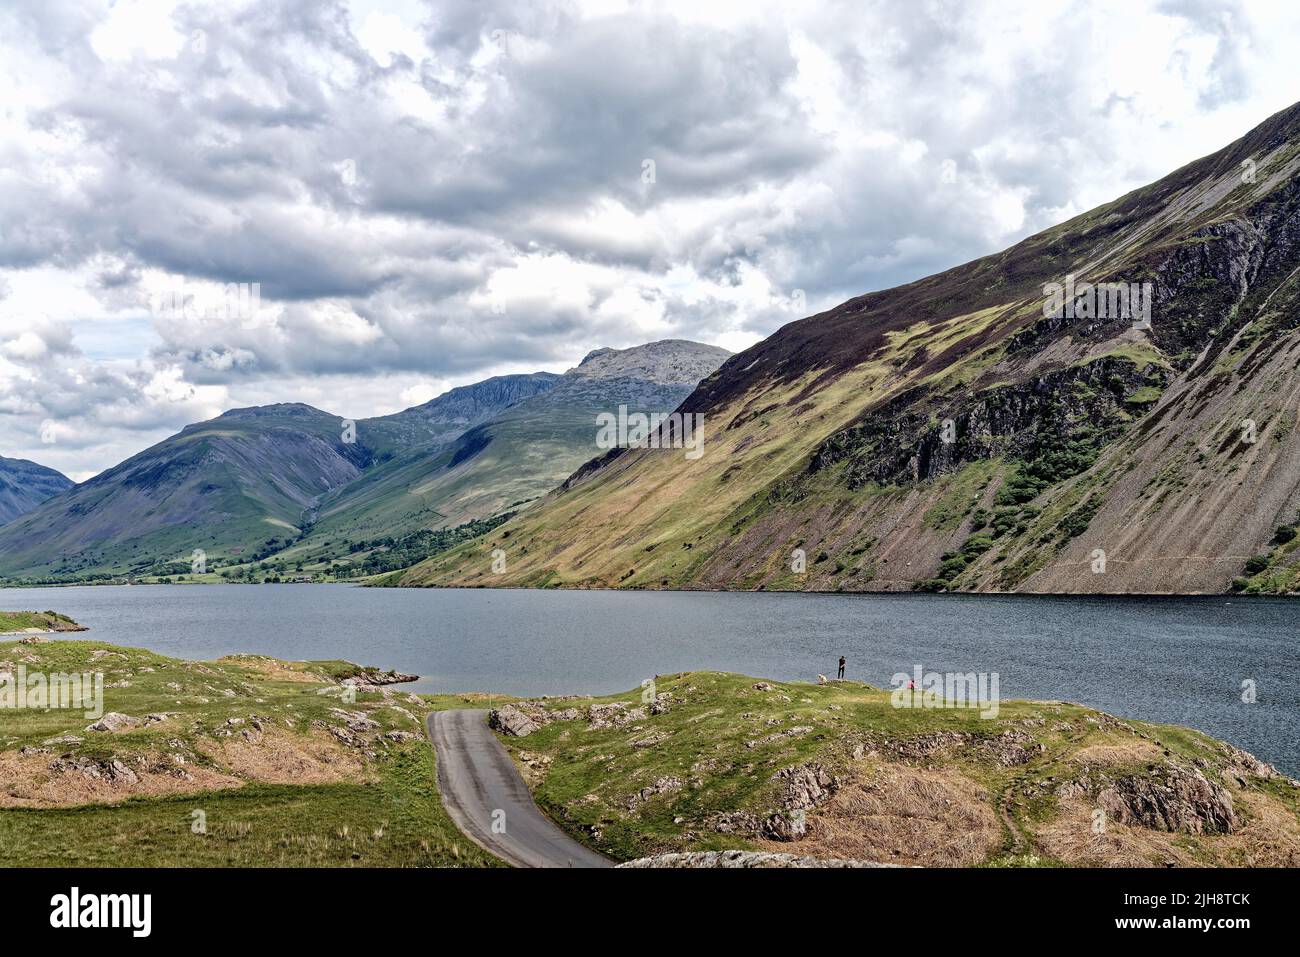 The dramatic view of Wastwater lake looking towards Wasdale Head and the surrounding mountains on a summers day Cumbria England UK Stock Photo